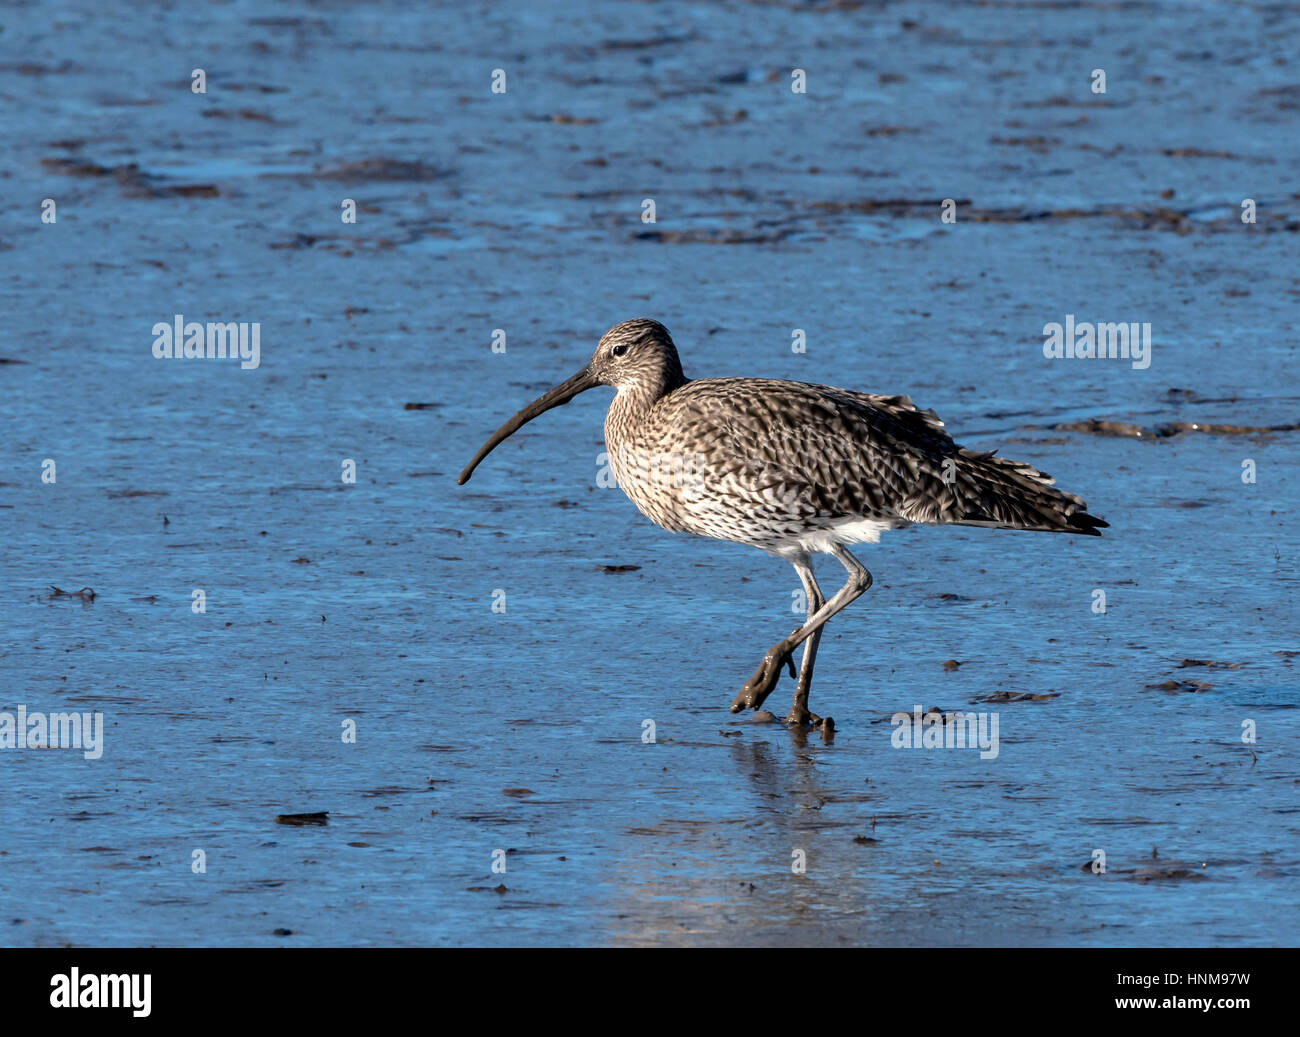 Curlew walking on mud flats Stock Photo